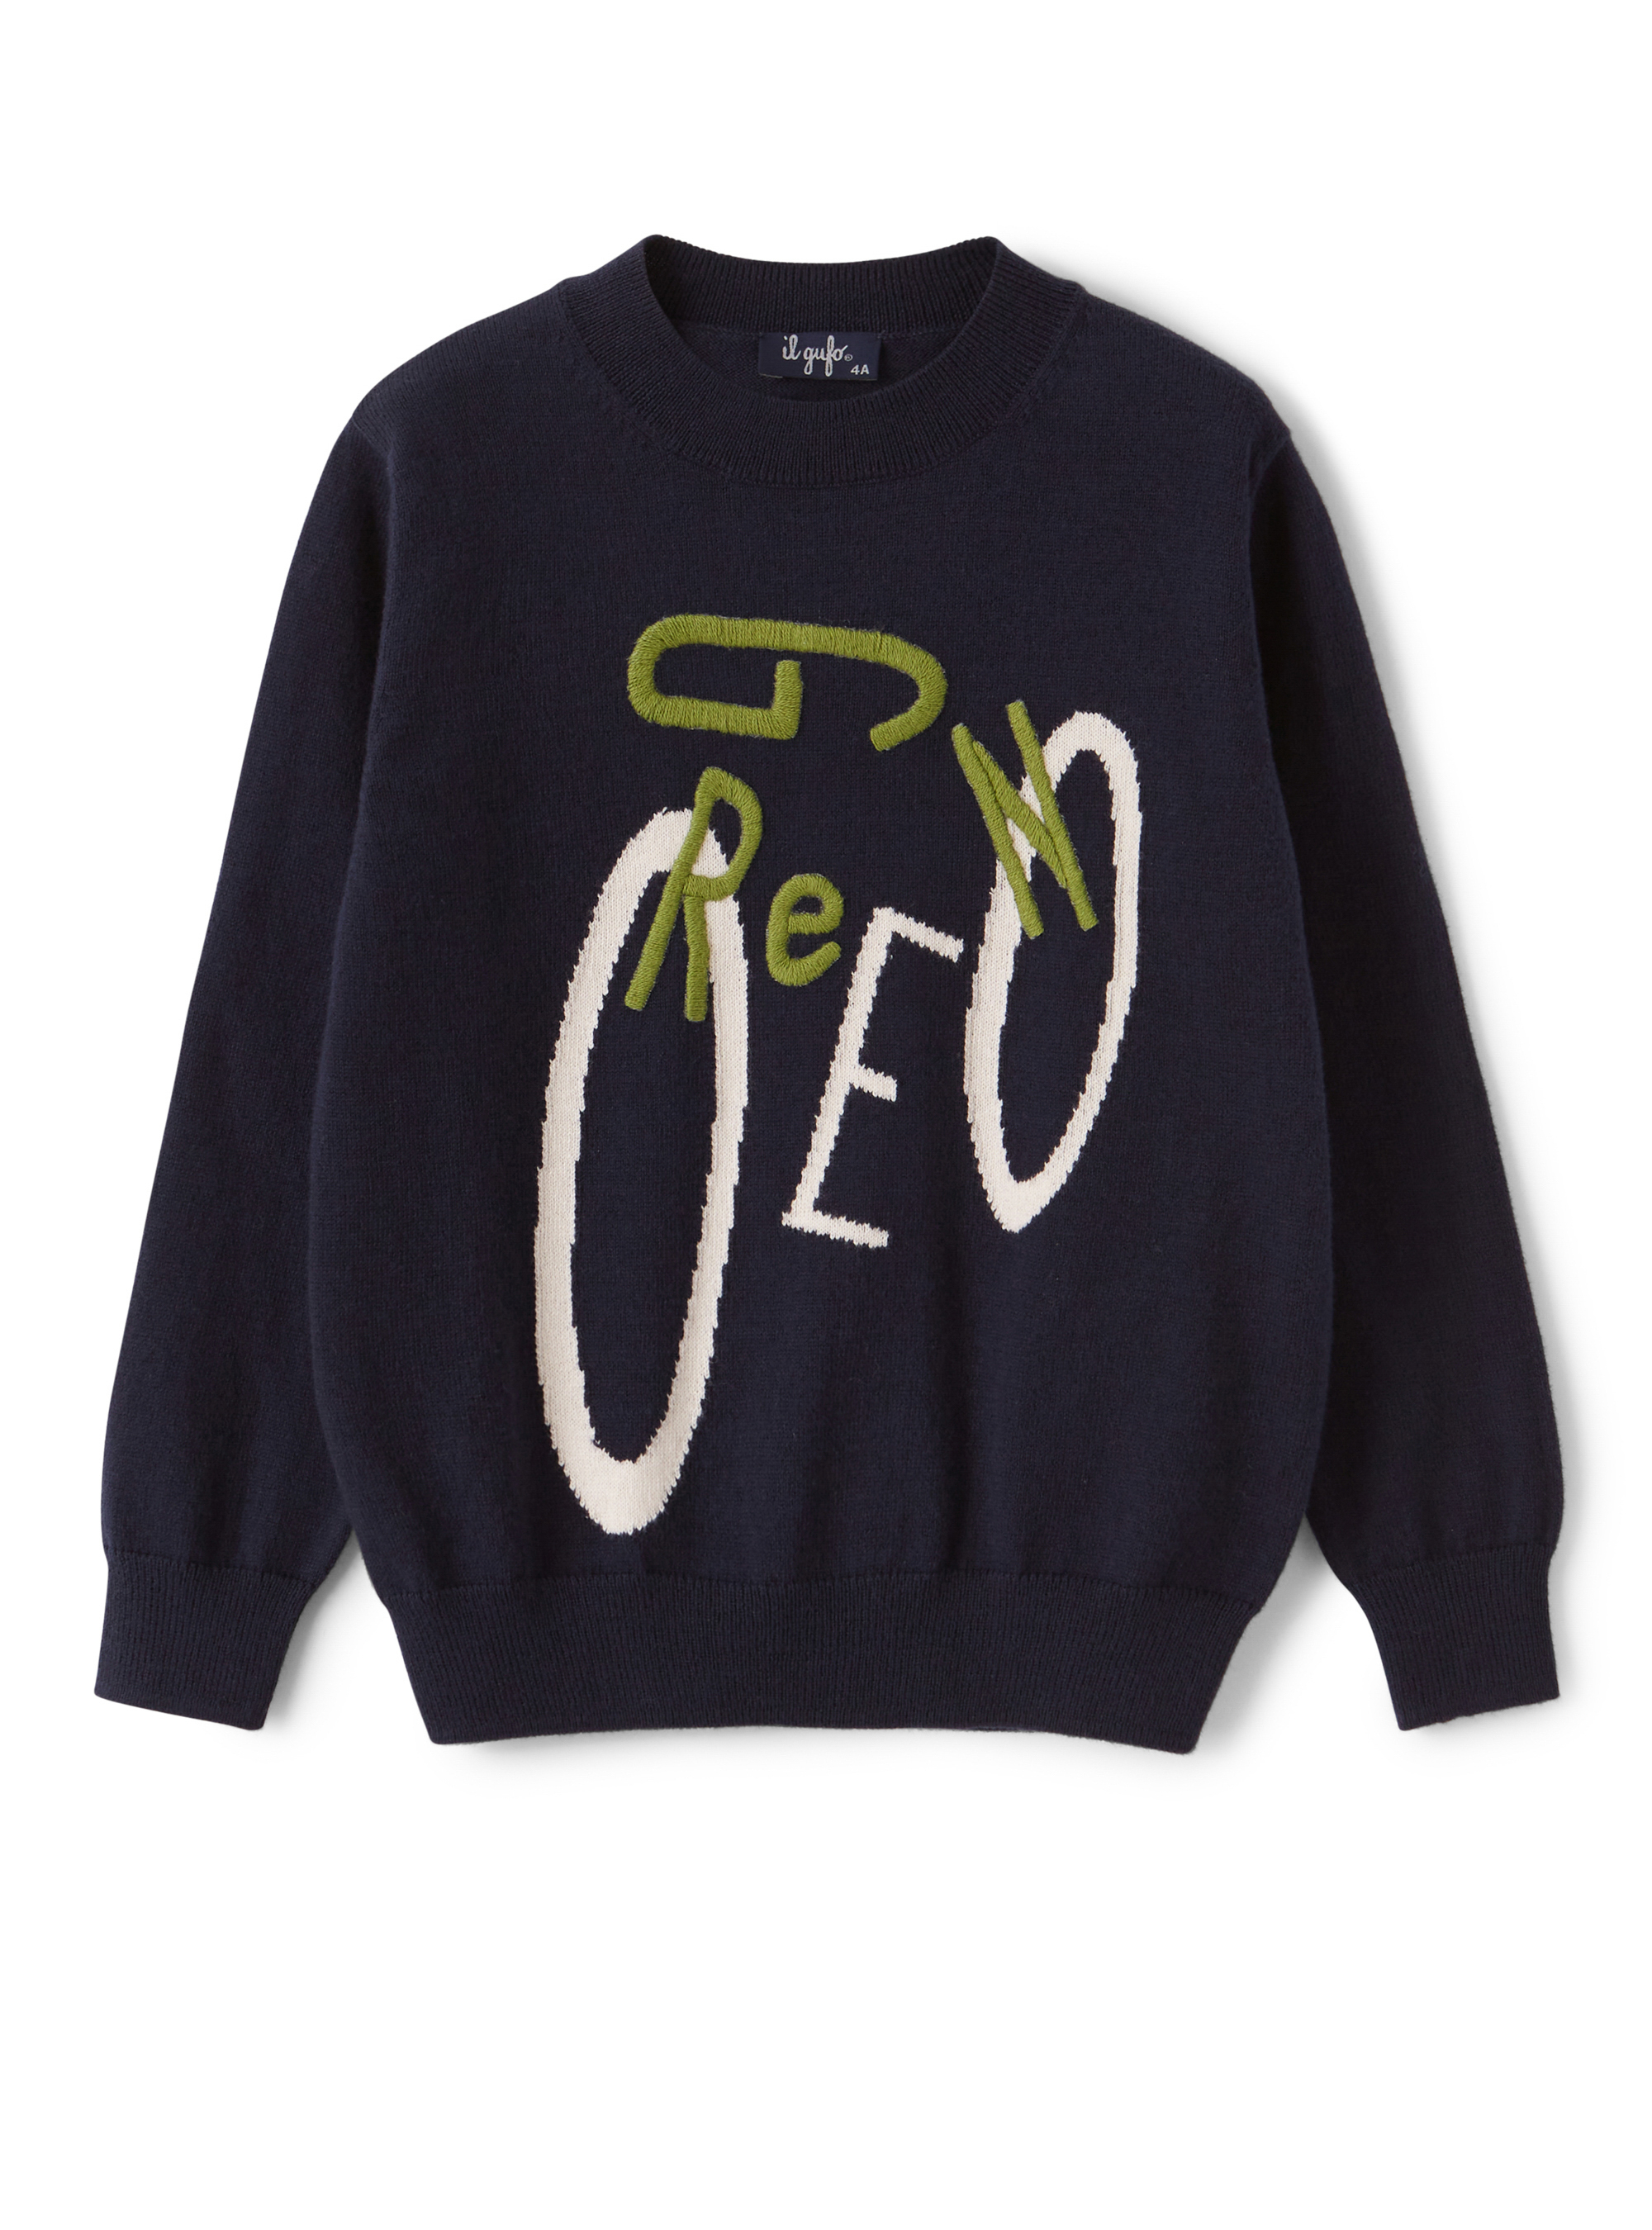 Blue sweater with "Green" lettering - Sweaters - Il Gufo